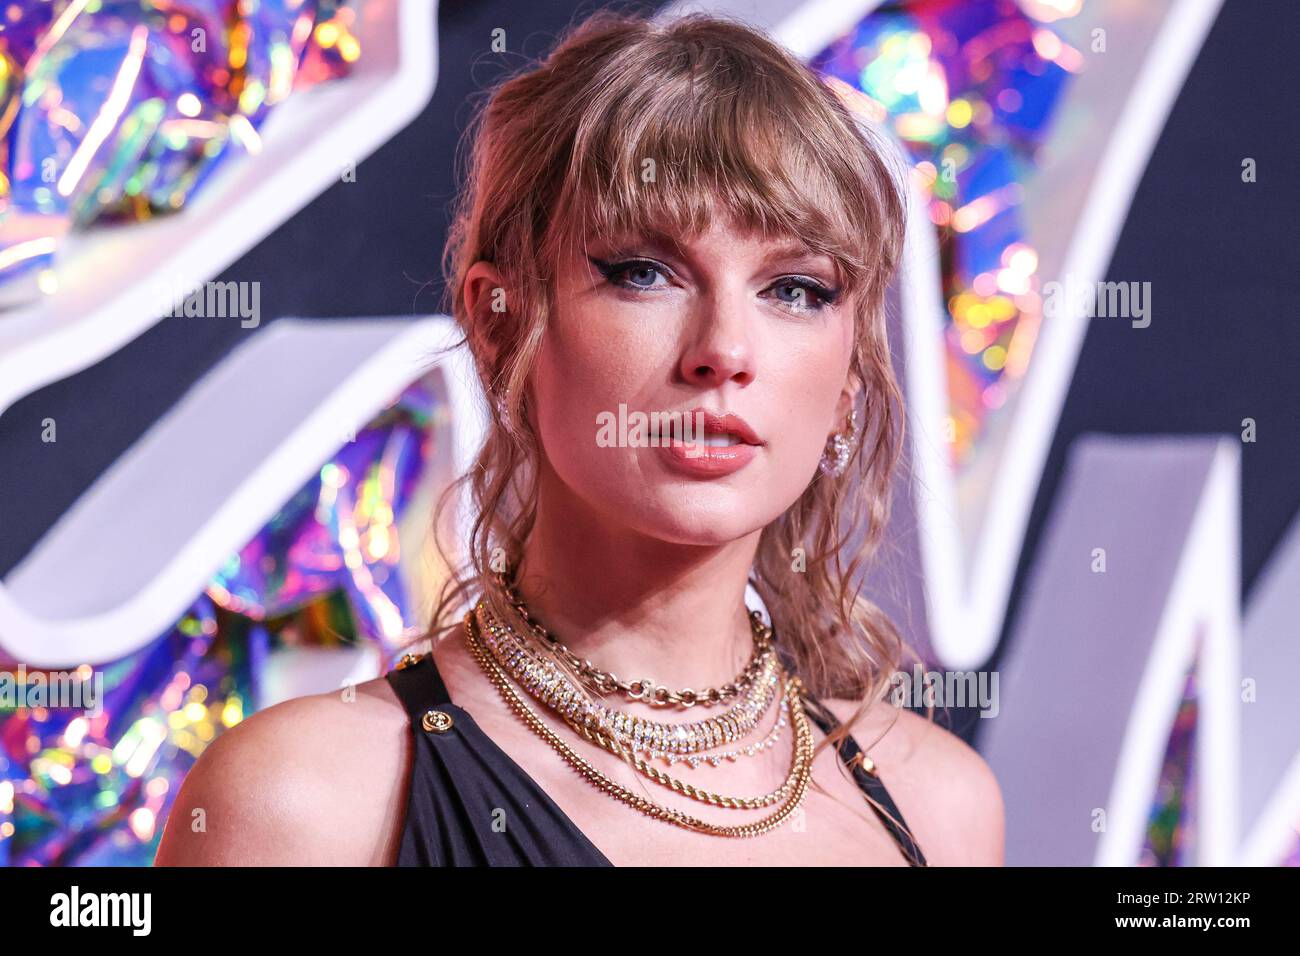 NEWARK, NEW JERSEY, USA - SEPTEMBER 12: American singer-songwriter Taylor Swift wearing a Versace dress arrives at the 2023 MTV Video Music Awards held at the Prudential Center on September 12, 2023 in Newark, New Jersey, United States. (Photo by Xavier Collin/Image Press Agency) Stock Photo